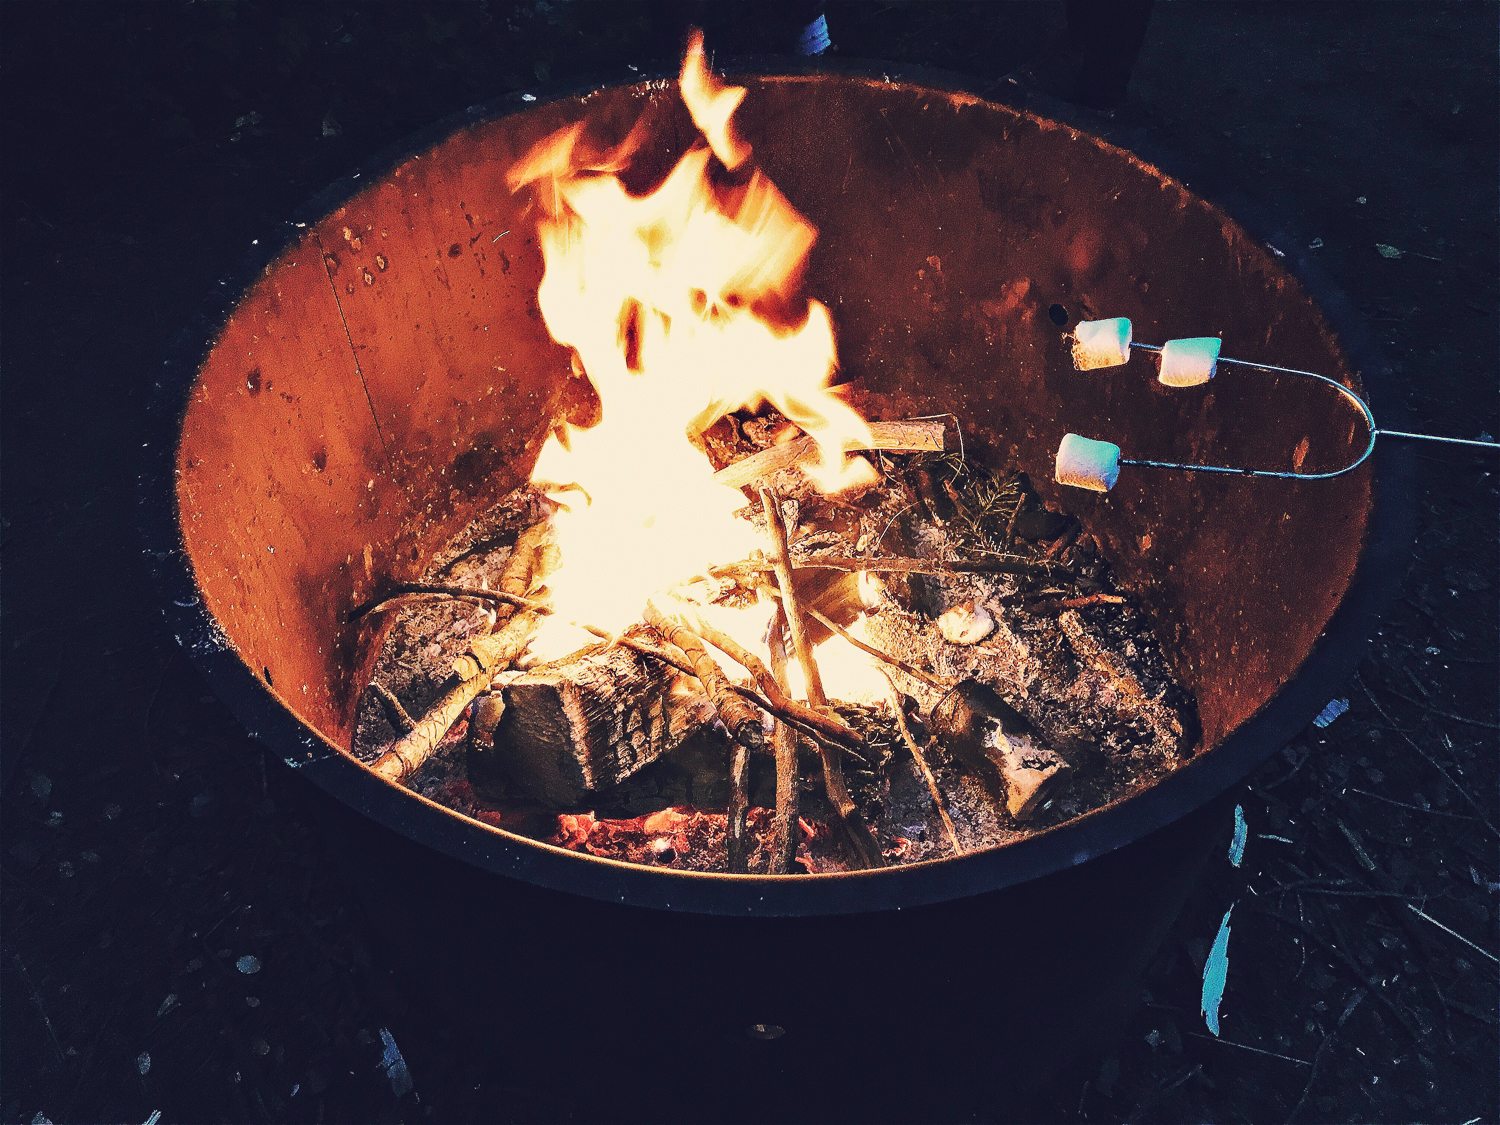 Cooking marshmallows on a firepit